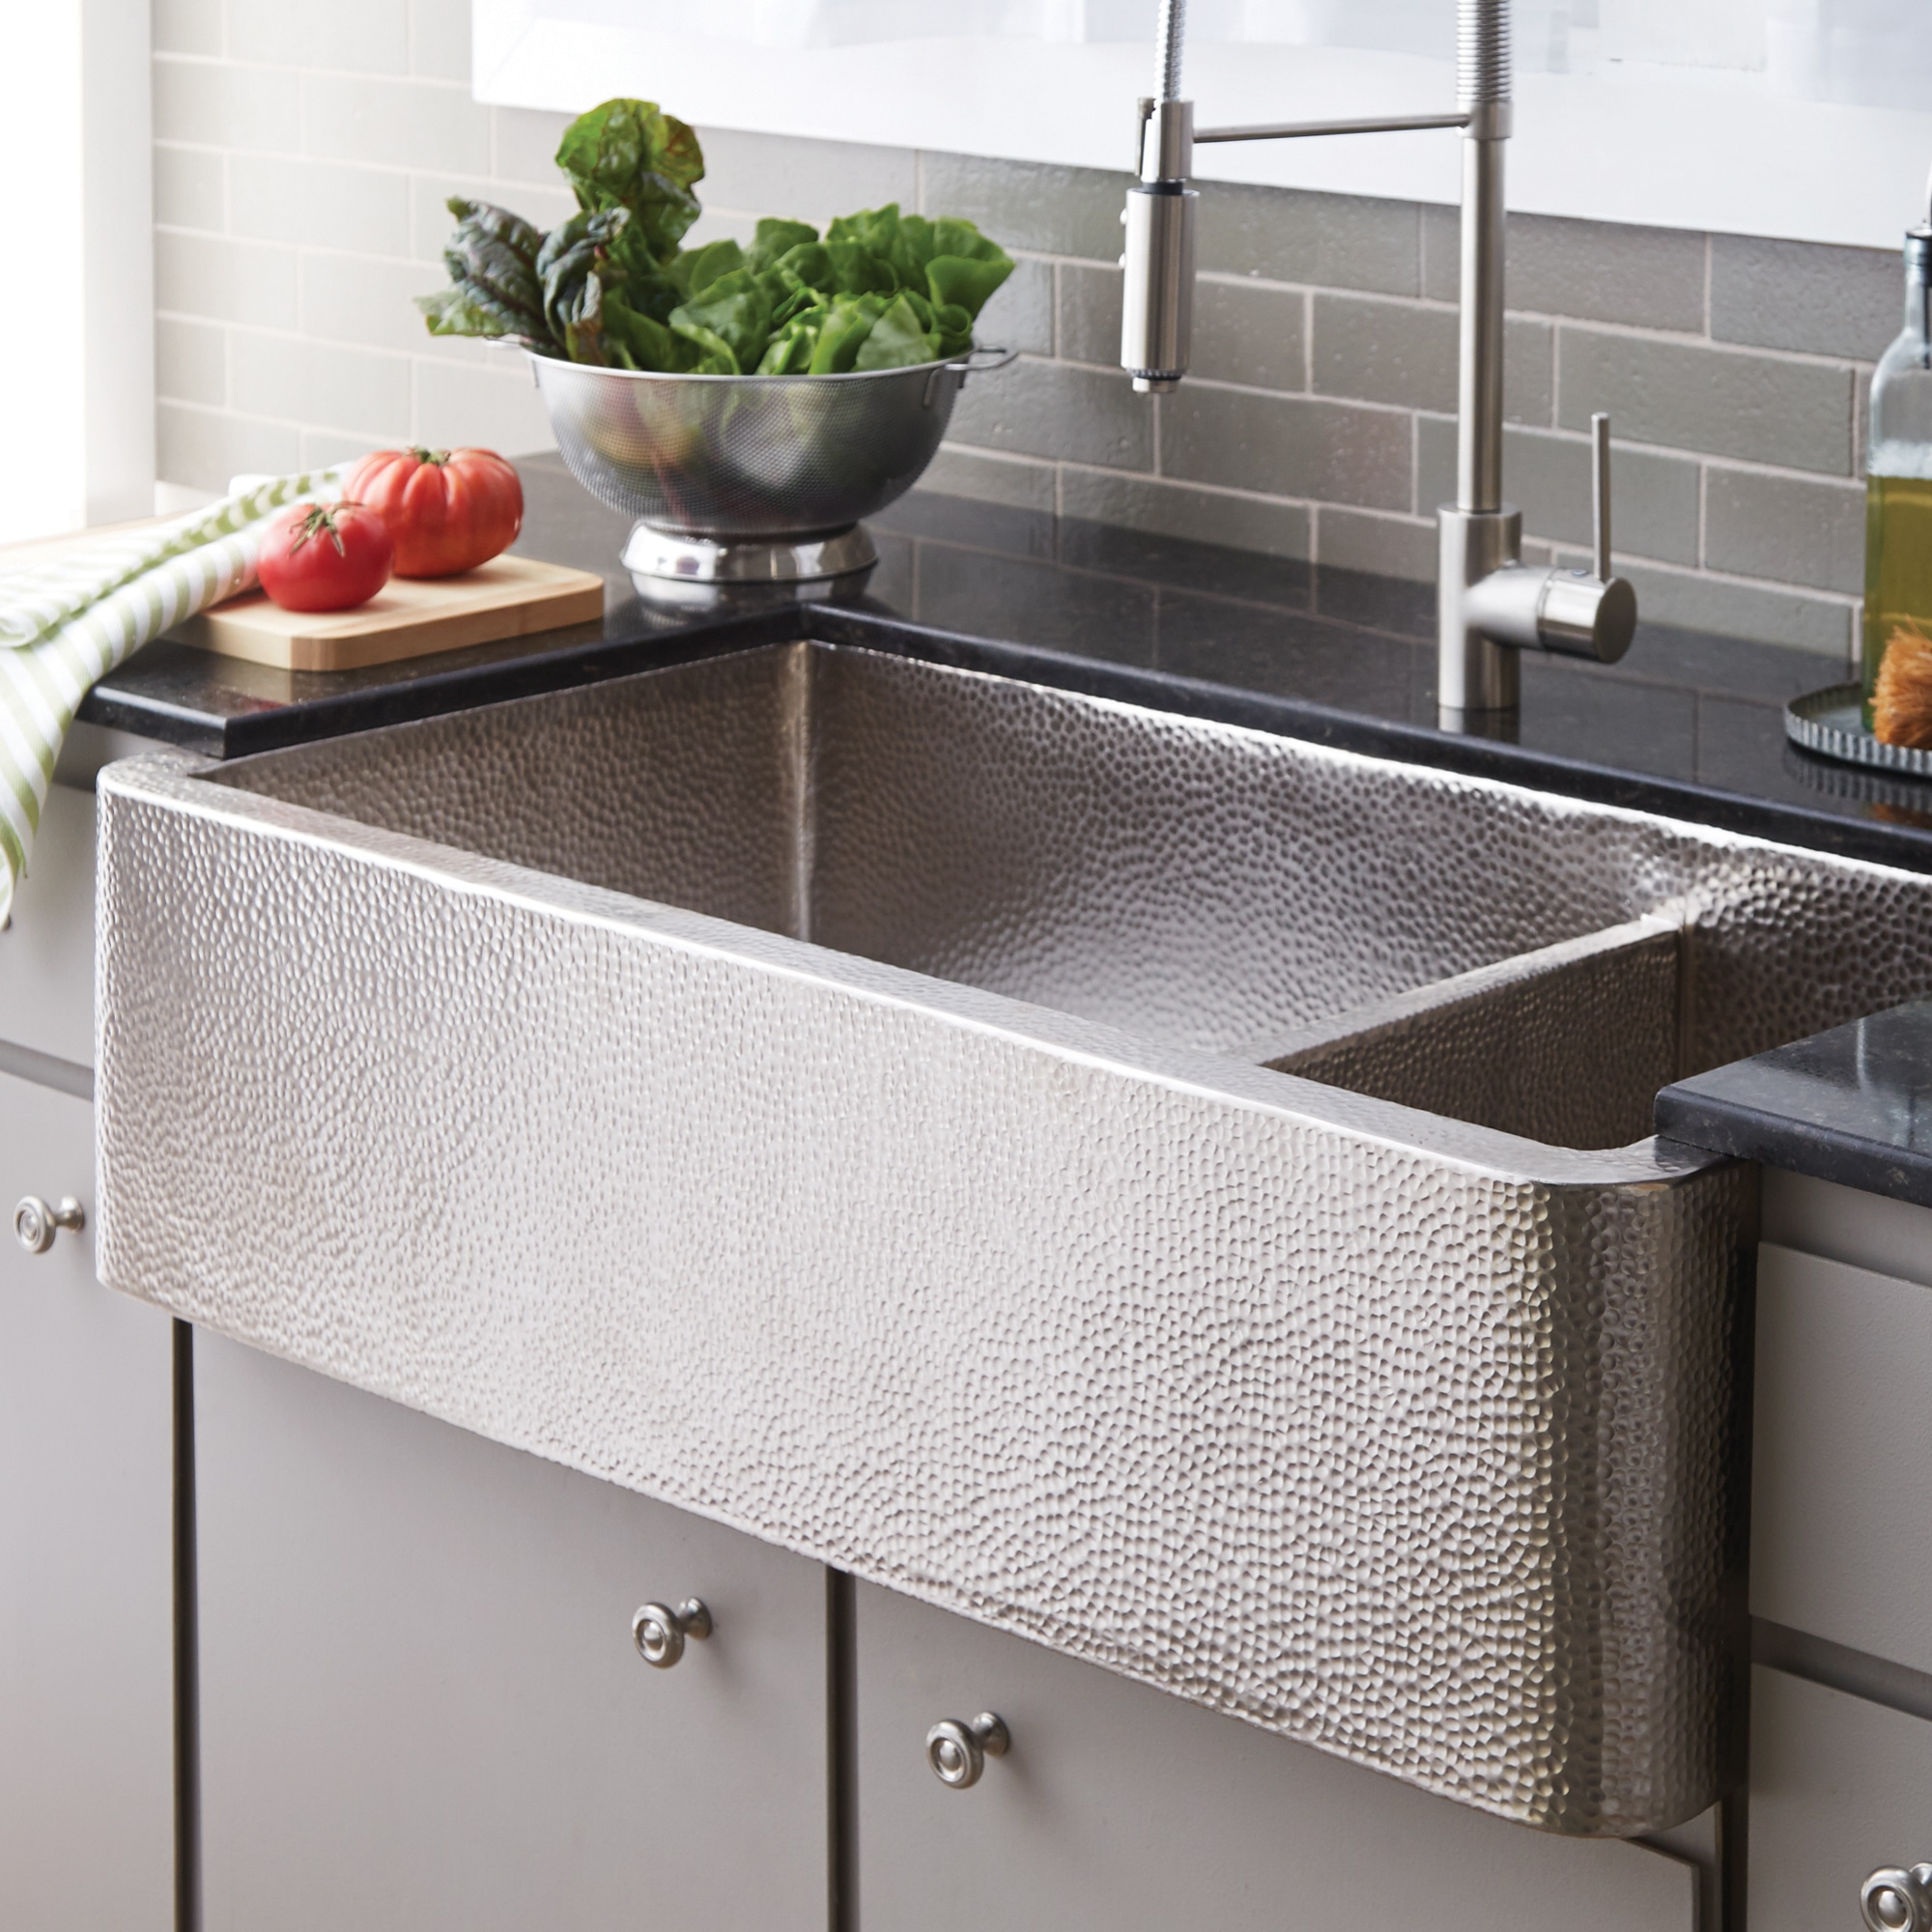 Native Trails Farmhouse Duet Pro 40 Nickel Farmhouse Sink, 70/30 Double Bowl, Brushed Nickel, CPK574